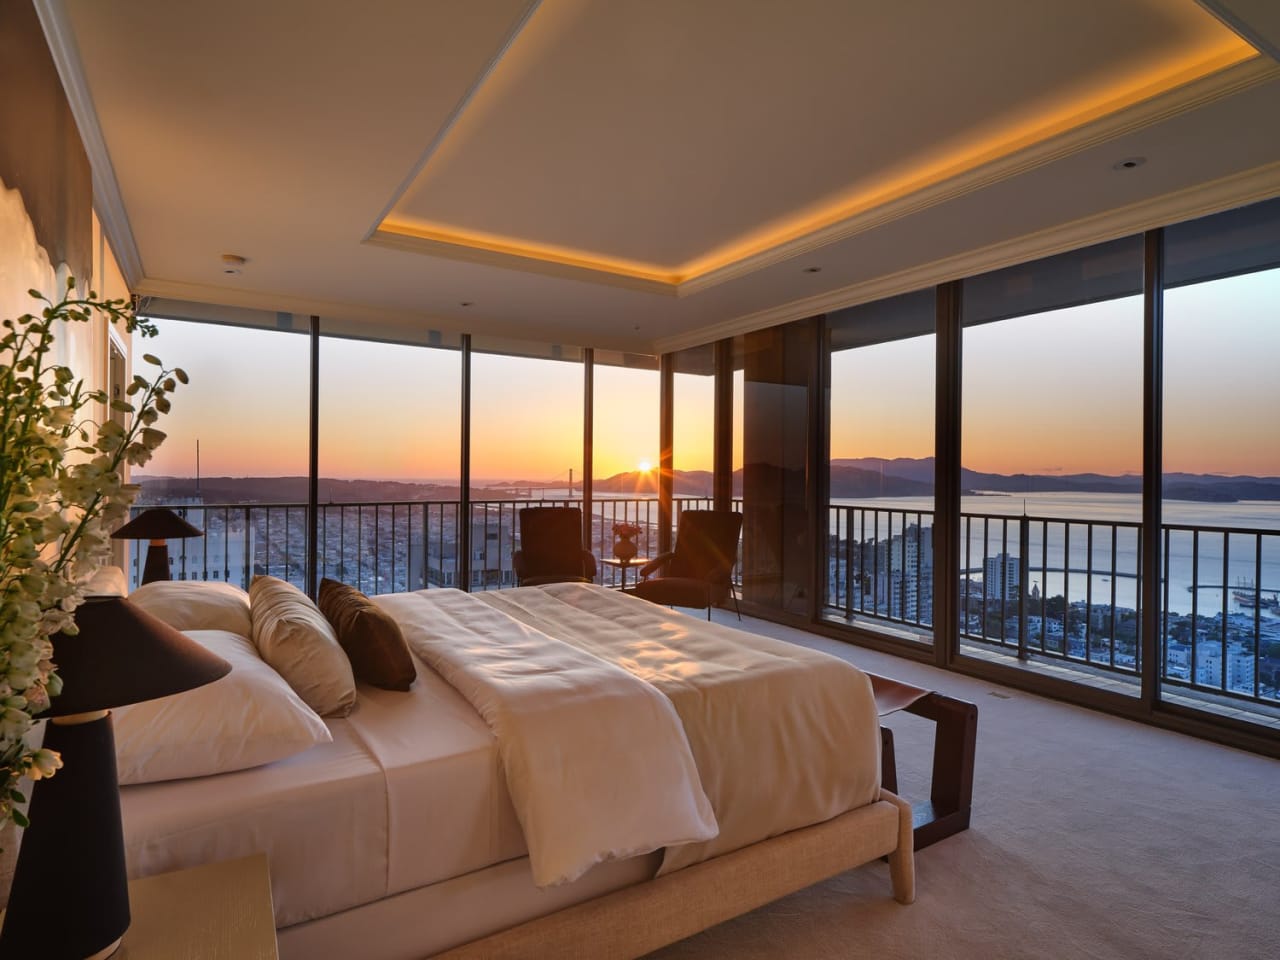 The Penthouses at the Summit